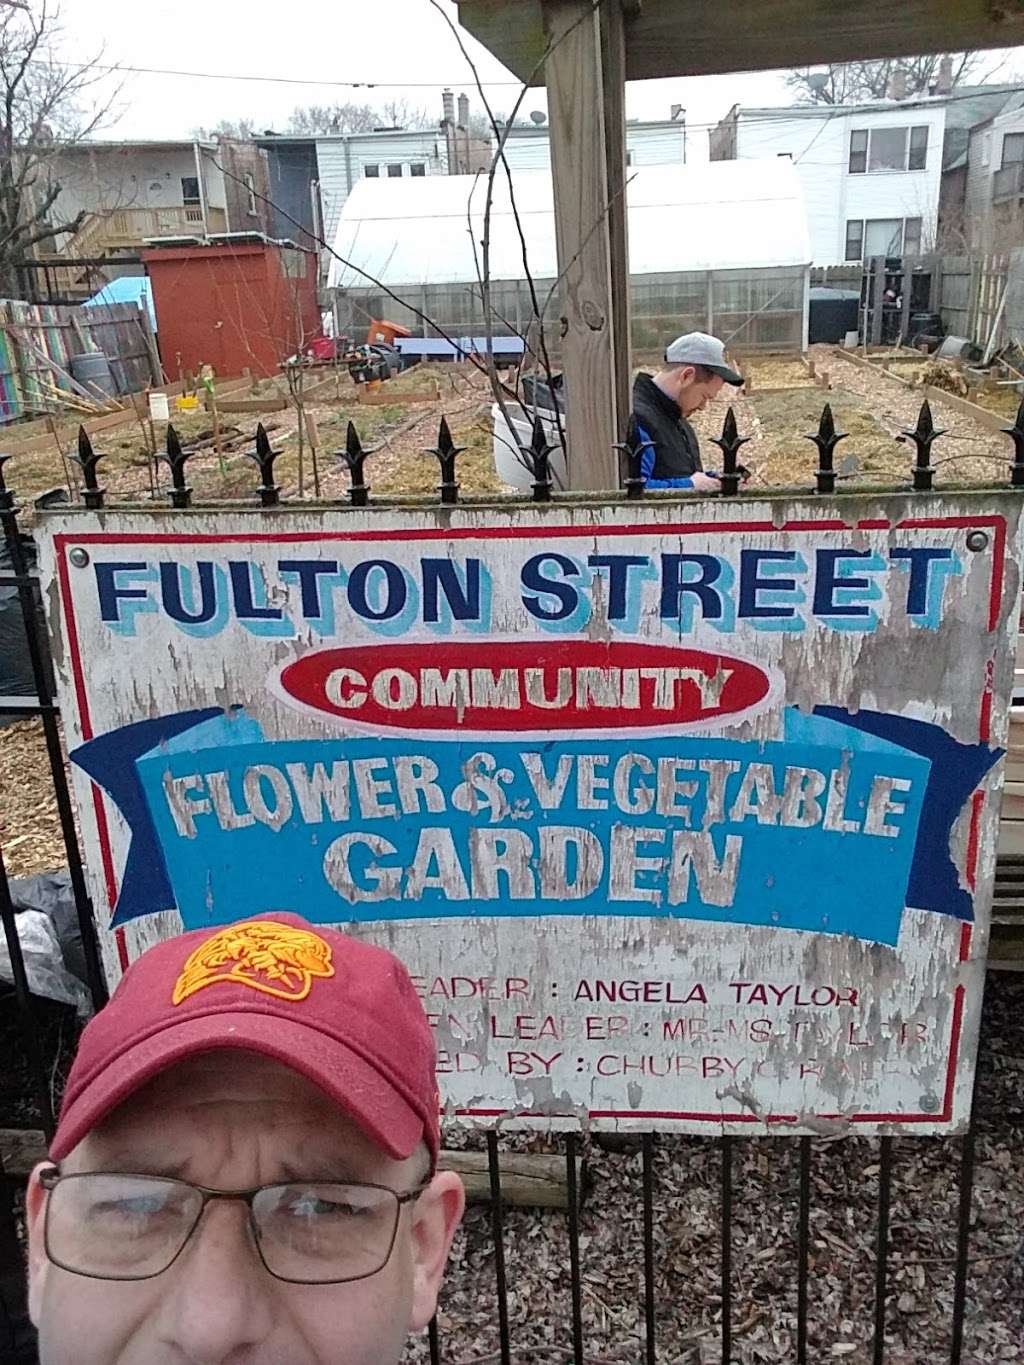 Fulton St. Flower and Vegetable Garden | 4427 W Fulton St, Chicago, IL 60624, USA